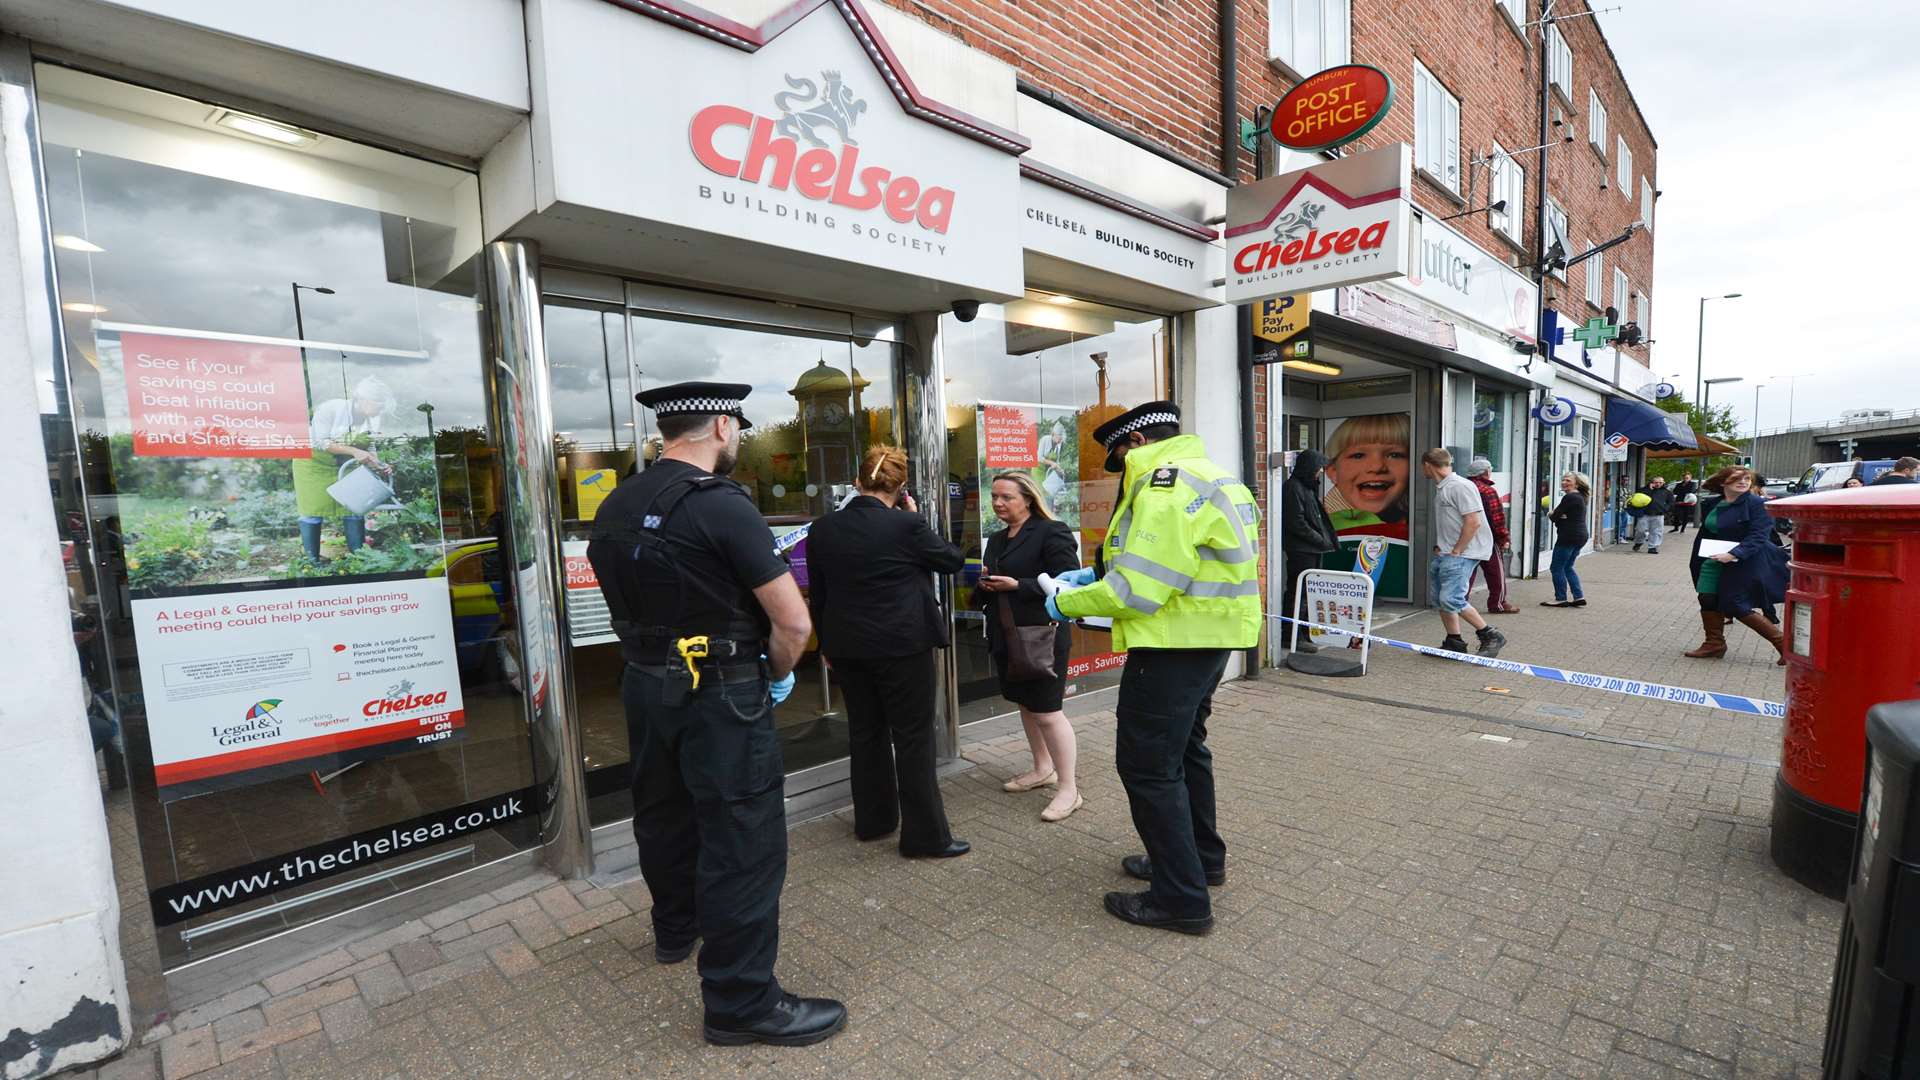 Police outside the Chelsea Building Society in Sunbury after the raid. Picture: SWNS.com/Tony Kershaw